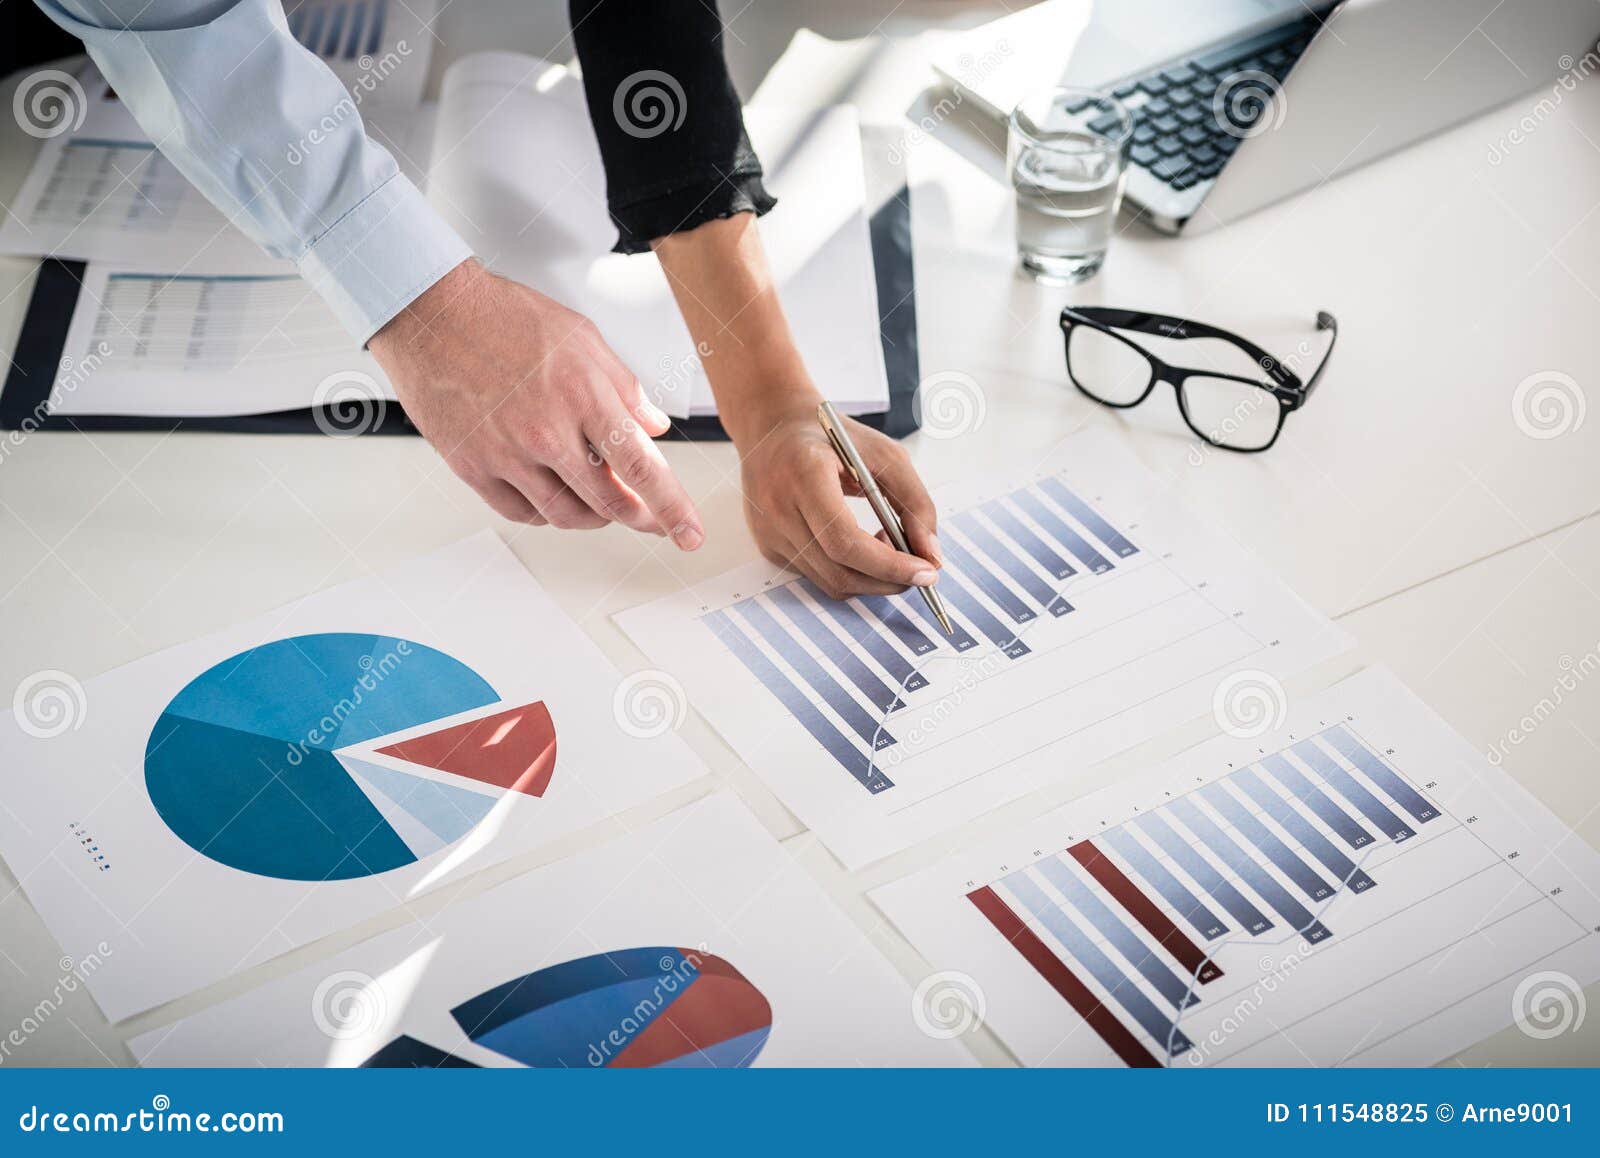 business experts analyzing statistical bar and pie charts